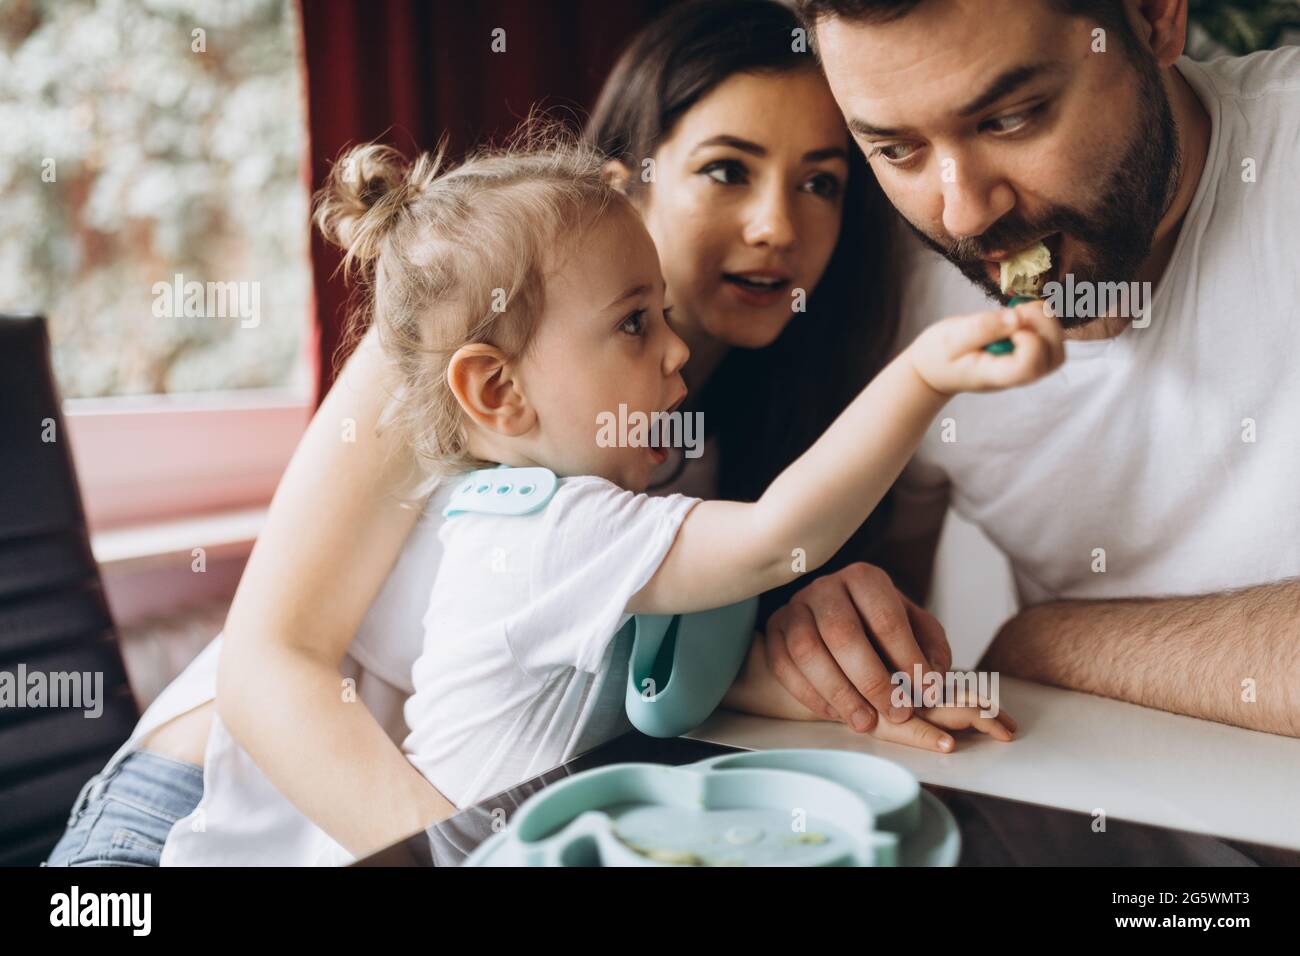 https://c8.alamy.com/comp/2G5WMT3/little-child-feeds-his-father-with-spoon-2G5WMT3.jpg